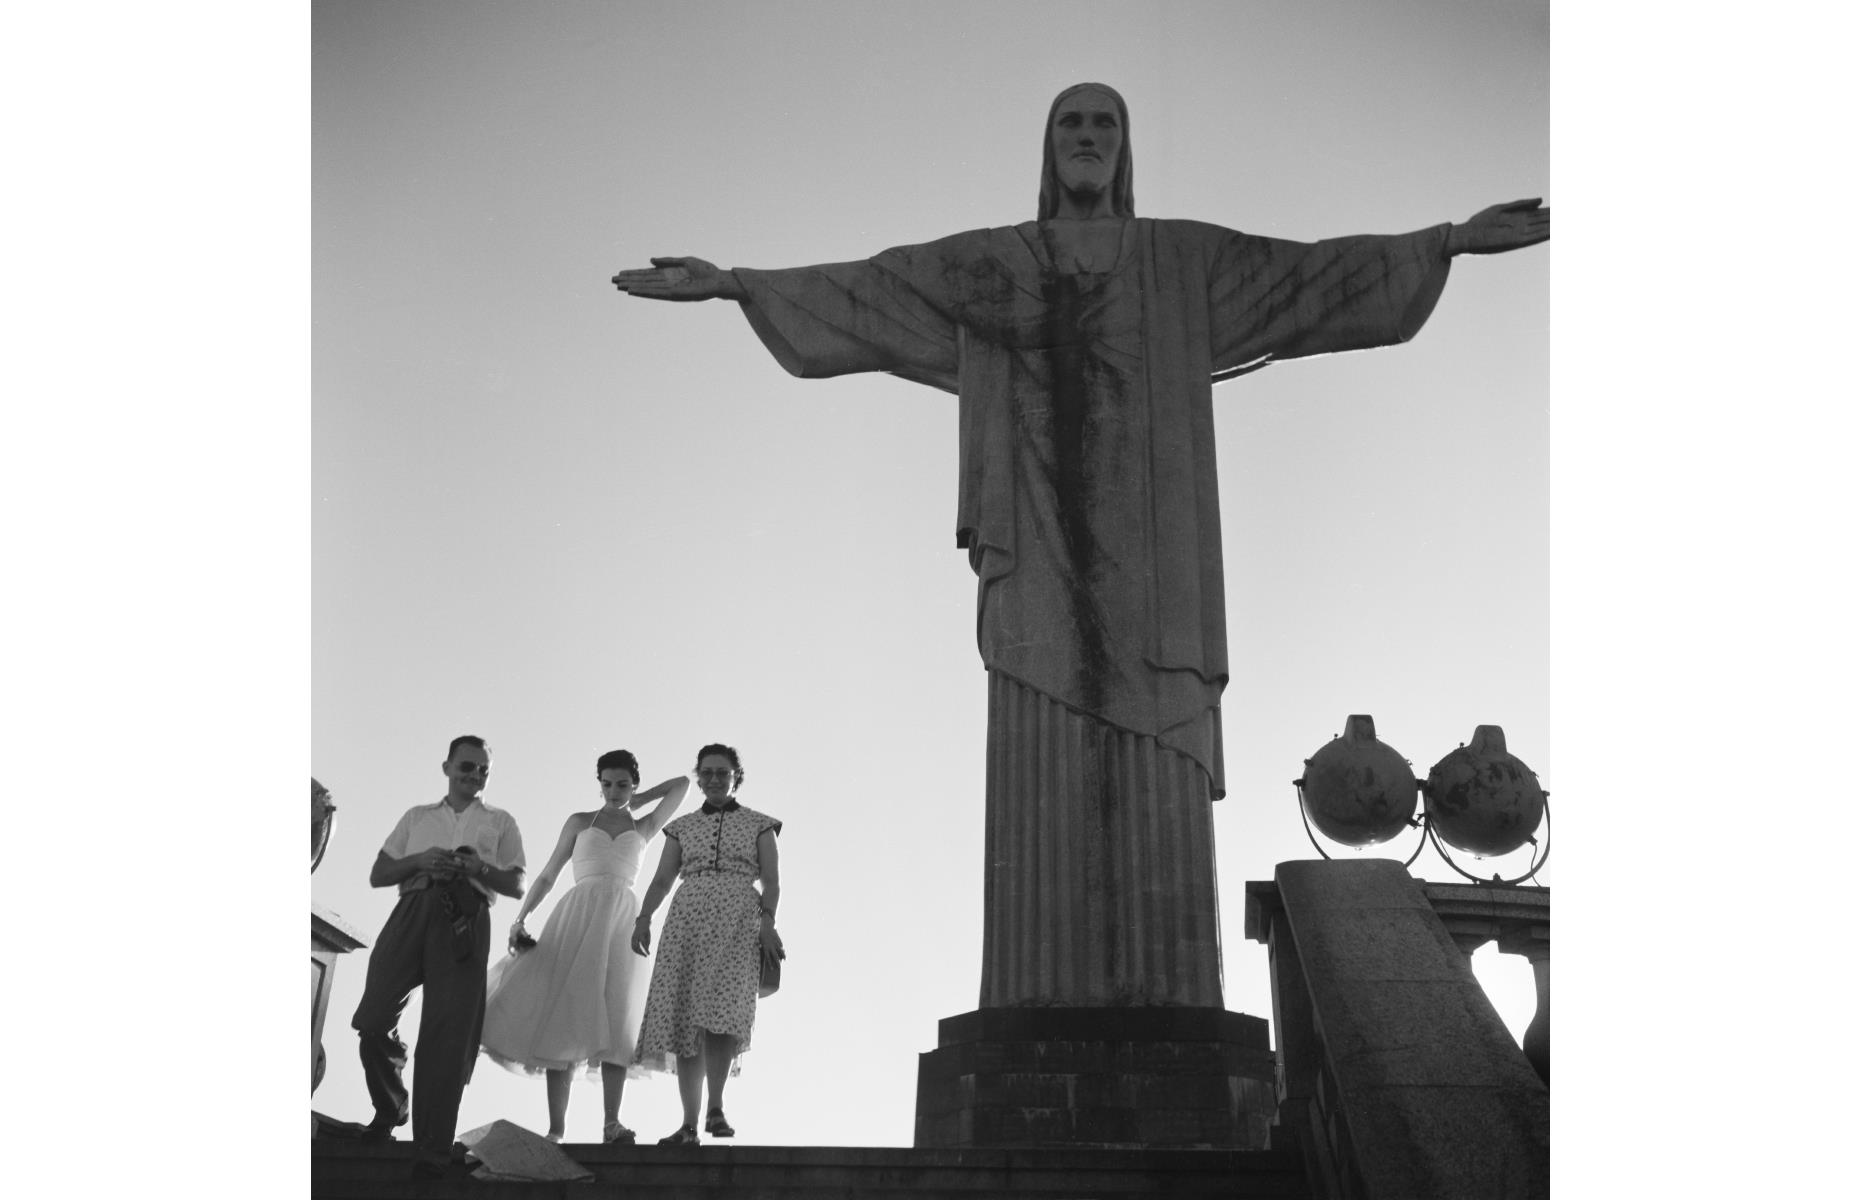 An iconic piece of Rio de Janeiro’s skyline, the 98-foot-tall (30m) Christ the Redeemer monument standing on the summit of Mount Corcovado is the largest Art Deco-style statue in the world. You might be surprised to learn that the landmark had been more than 70 years in the making when construction finally began in 1922 – the idea was first suggested in the mid-1850s. Here it’s pictured with tourists in the 1950s.